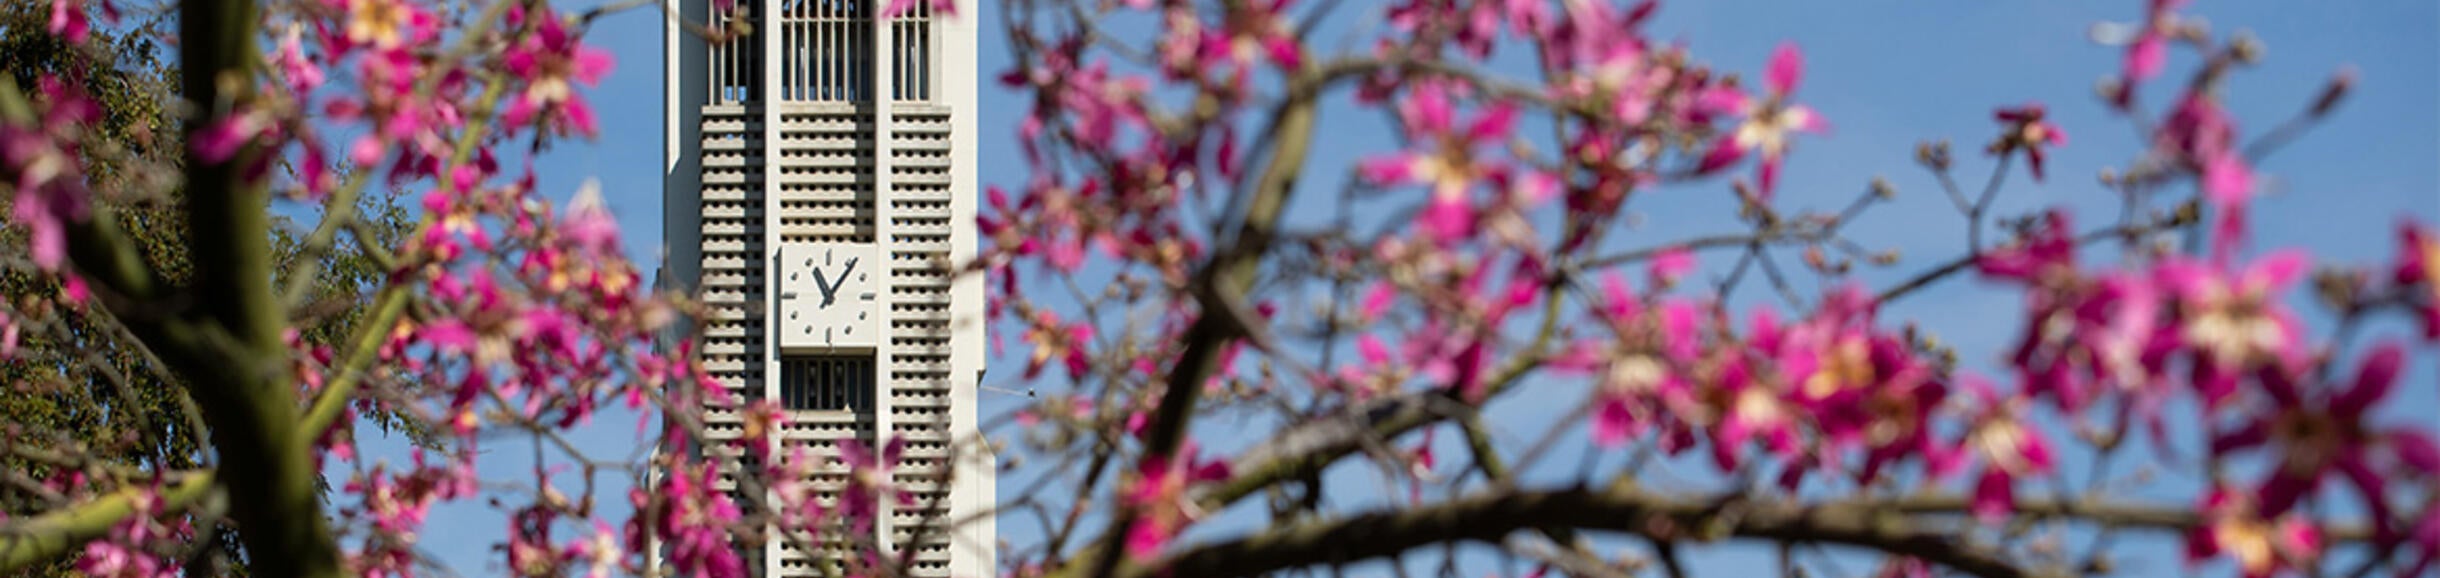 A History of CNAS Deans - UCR Bell Tower Surrounded by Pink Blooms